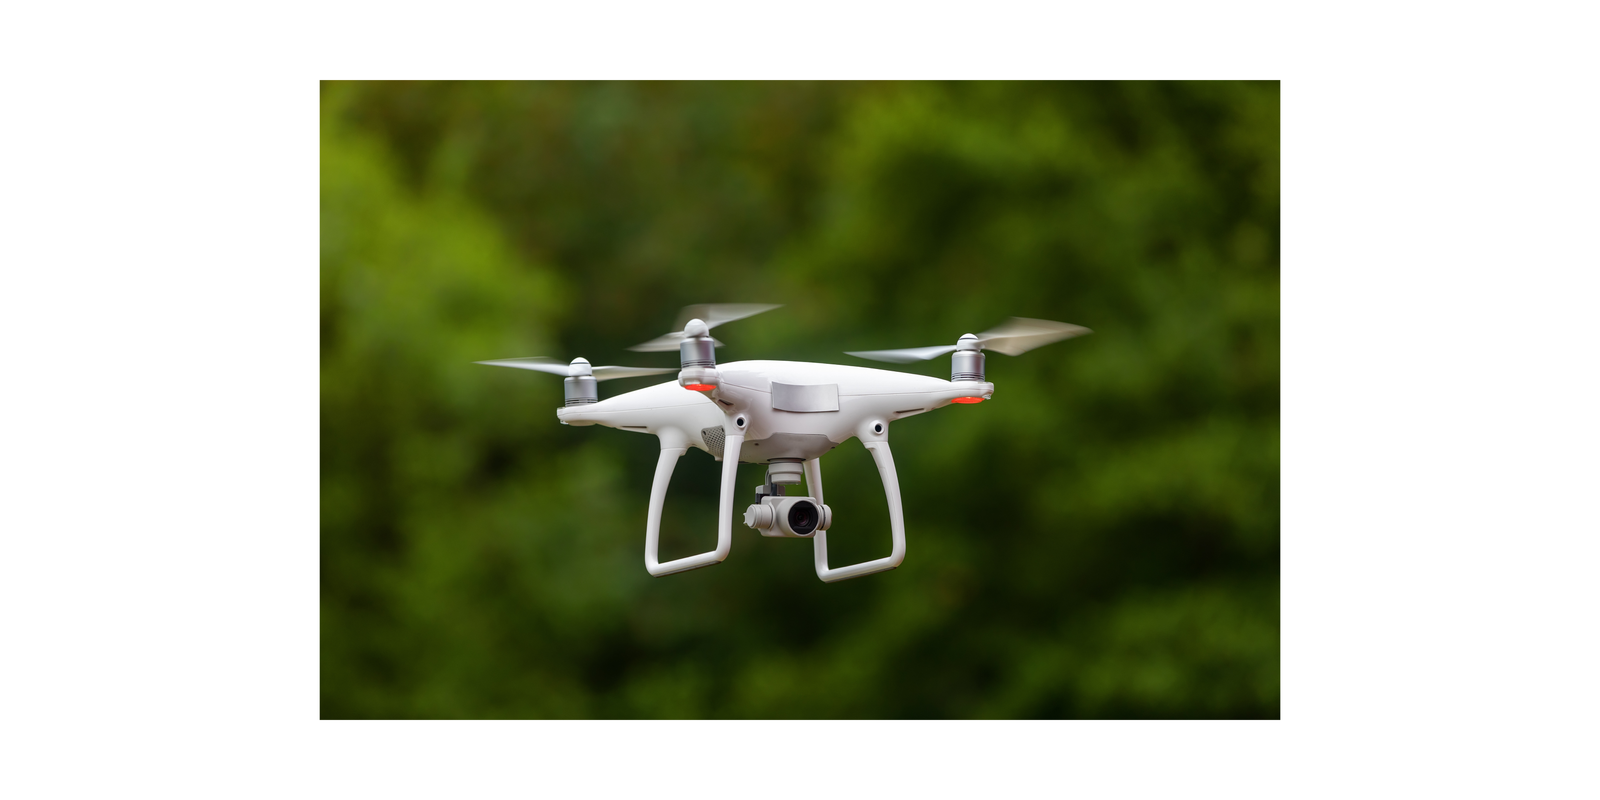 Is Drone Insurance Mandatory in India?